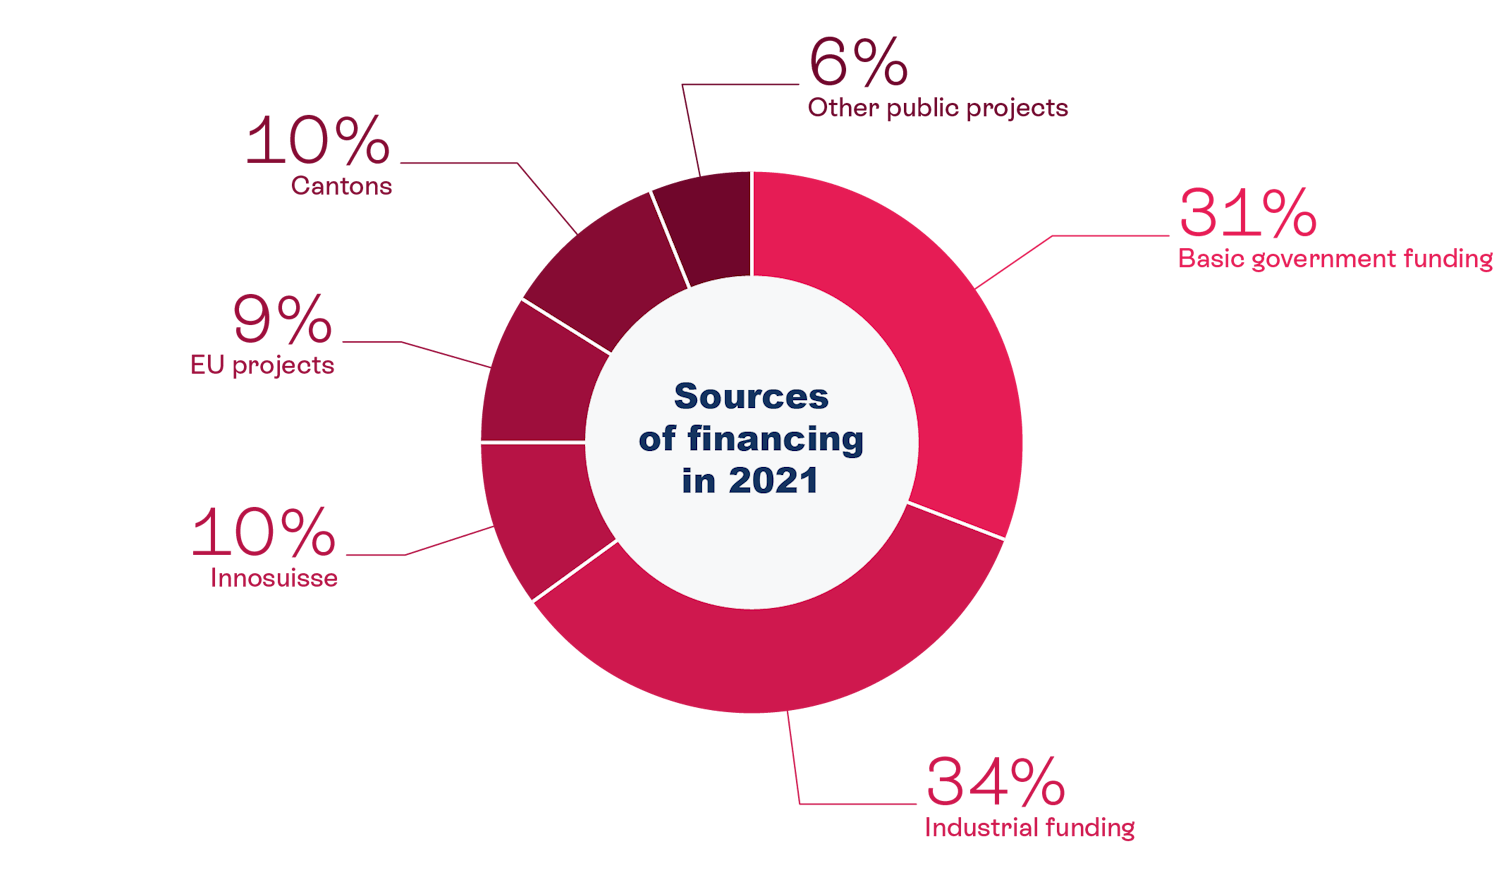 Sources of financing in 2021